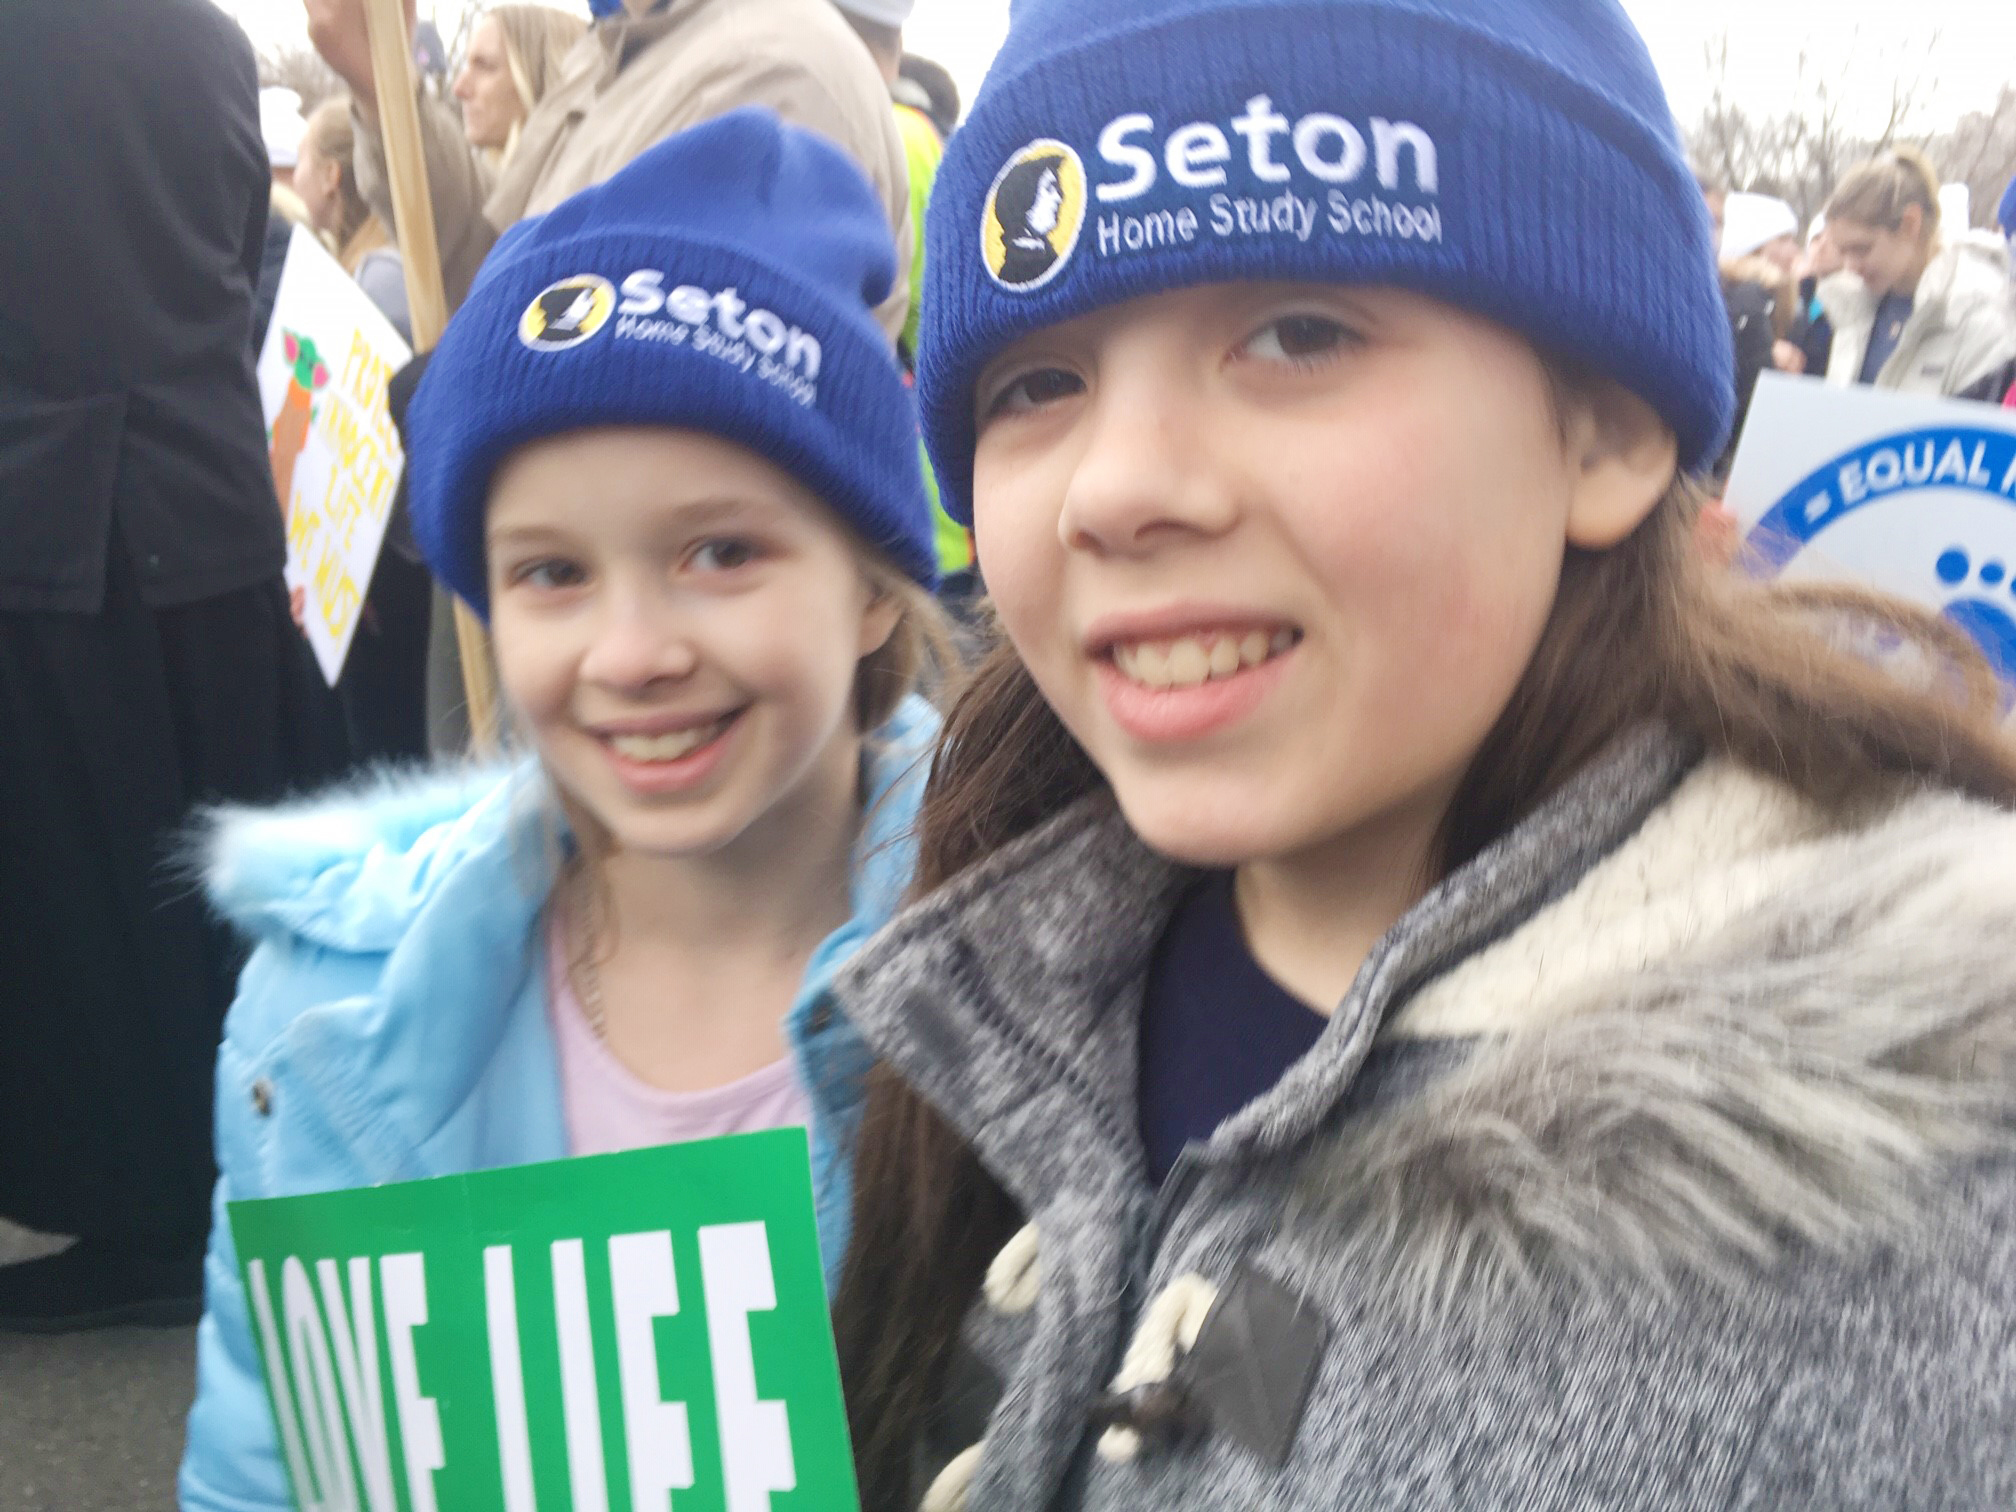 March for Life